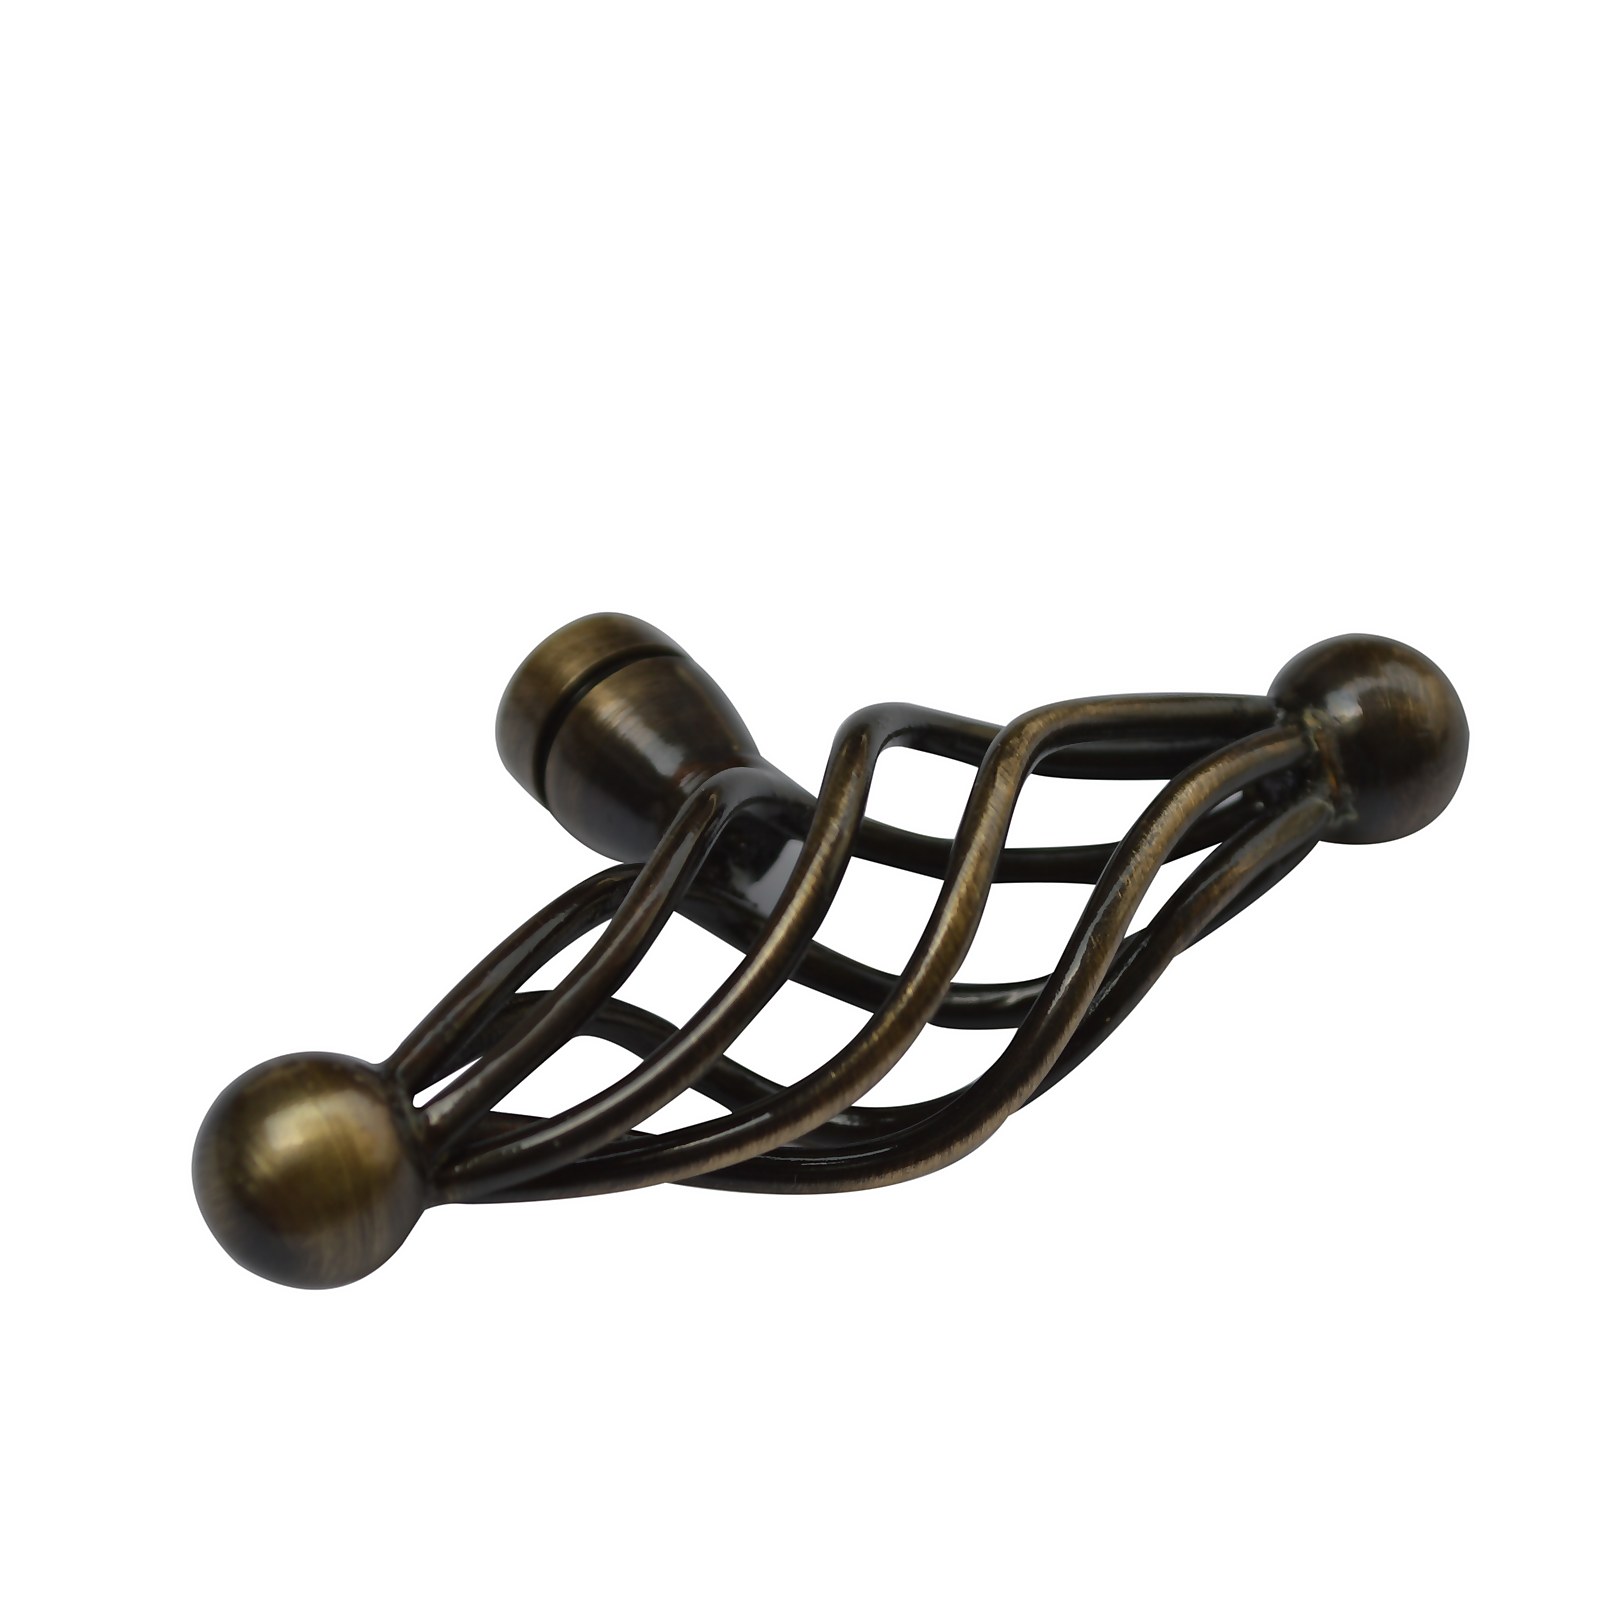 Photo of Twyford 30mm Cage Brass Cabinet Knob - 2 Pack